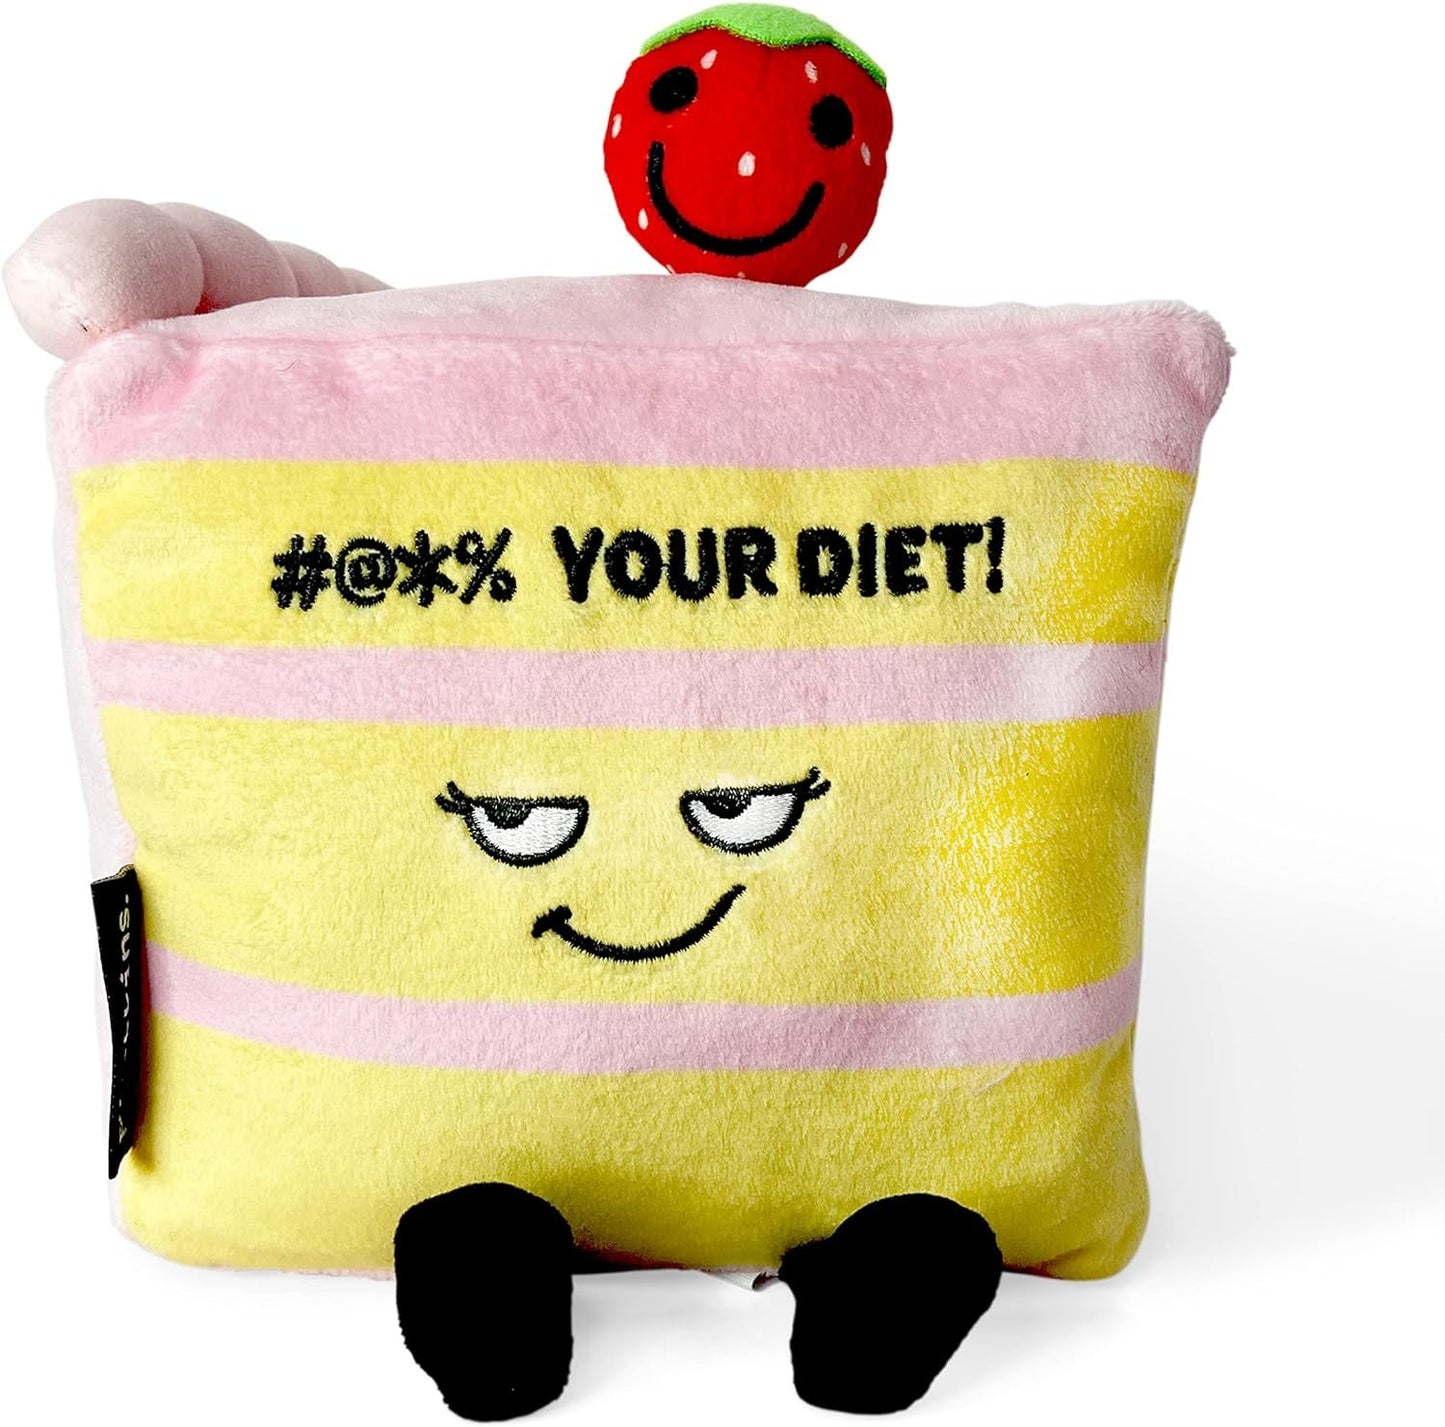 Punchkins - "#@*%" Your Diet Cake Slice Plushie